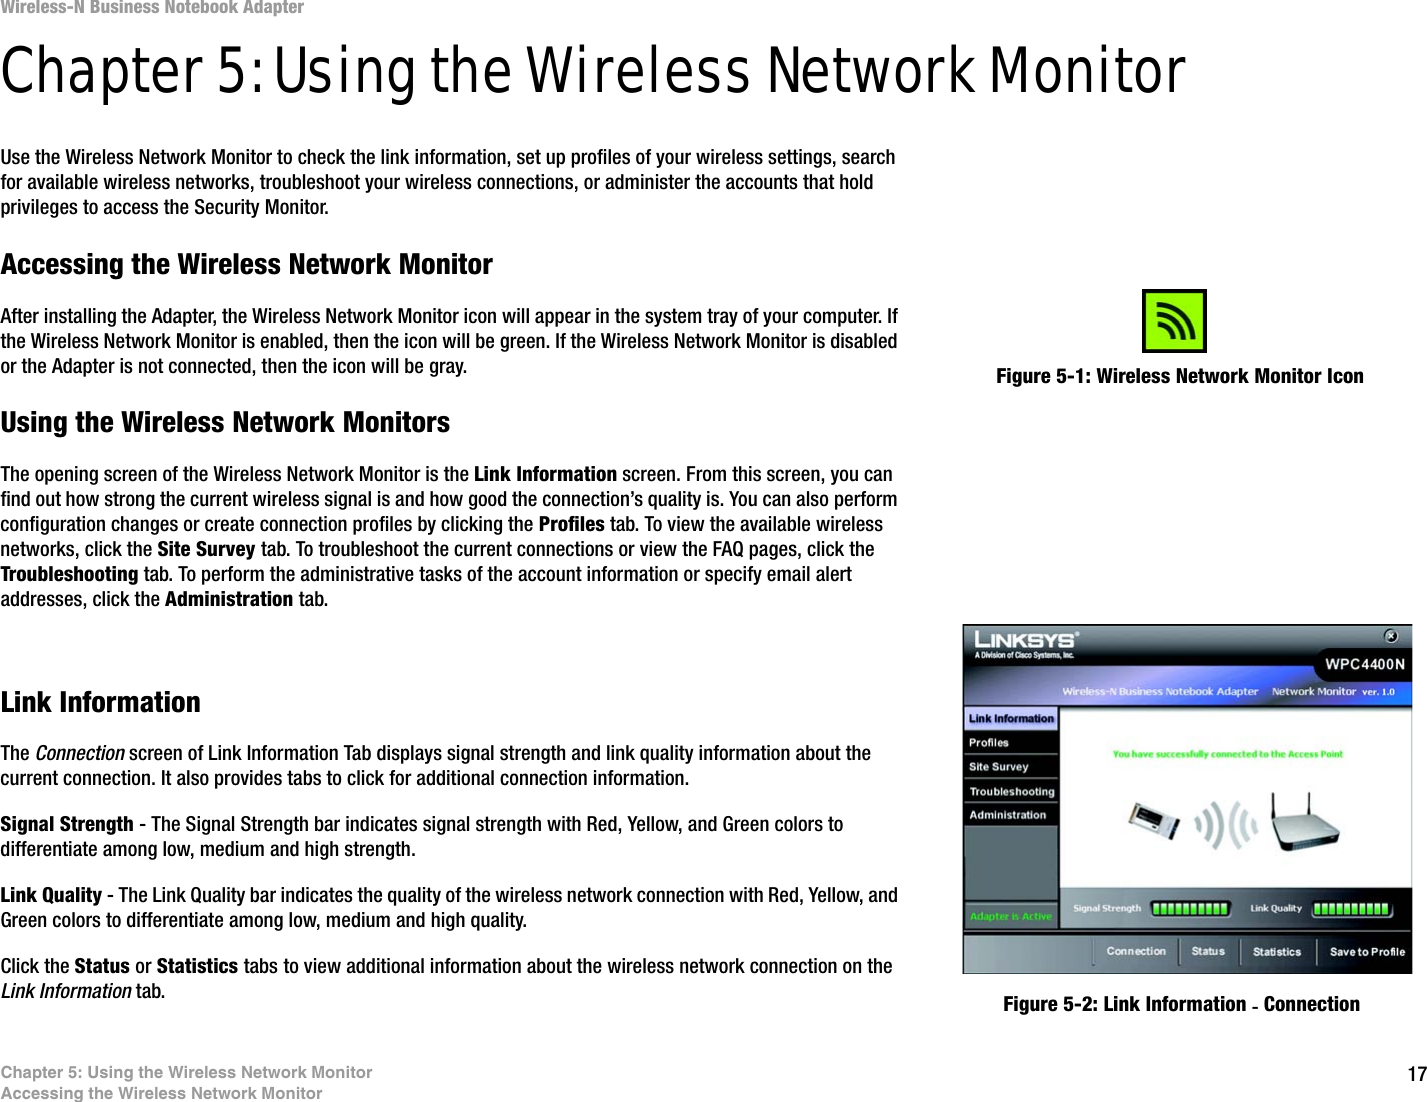 17Chapter 5: Using the Wireless Network MonitorAccessing the Wireless Network MonitorWireless-N Business Notebook Adapter Chapter 5: Using the Wireless Network MonitorUse the Wireless Network Monitor to check the link information, set up profiles of your wireless settings, search for available wireless networks, troubleshoot your wireless connections, or administer the accounts that hold privileges to access the Security Monitor.Accessing the Wireless Network MonitorAfter installing the Adapter, the Wireless Network Monitor icon will appear in the system tray of your computer. If the Wireless Network Monitor is enabled, then the icon will be green. If the Wireless Network Monitor is disabled or the Adapter is not connected, then the icon will be gray.Using the Wireless Network MonitorsThe opening screen of the Wireless Network Monitor is the Link Information screen. From this screen, you can find out how strong the current wireless signal is and how good the connection’s quality is. You can also perform configuration changes or create connection profiles by clicking the Profiles tab. To view the available wireless networks, click the Site Survey tab. To troubleshoot the current connections or view the FAQ pages, click the Troubleshooting tab. To perform the administrative tasks of the account information or specify email alert addresses, click the Administration tab.Link InformationThe Connection screen of Link Information Tab displays signal strength and link quality information about the current connection. It also provides tabs to click for additional connection information.Signal Strength - The Signal Strength bar indicates signal strength with Red, Yellow, and Green colors to differentiate among low, medium and high strength. Link Quality - The Link Quality bar indicates the quality of the wireless network connection with Red, Yellow, and Green colors to differentiate among low, medium and high quality.Click the Status or Statistics tabs to view additional information about the wireless network connection on the Link Information tab.Figure 5-1: Wireless Network Monitor IconFigure 5-2: Link Information - Connection